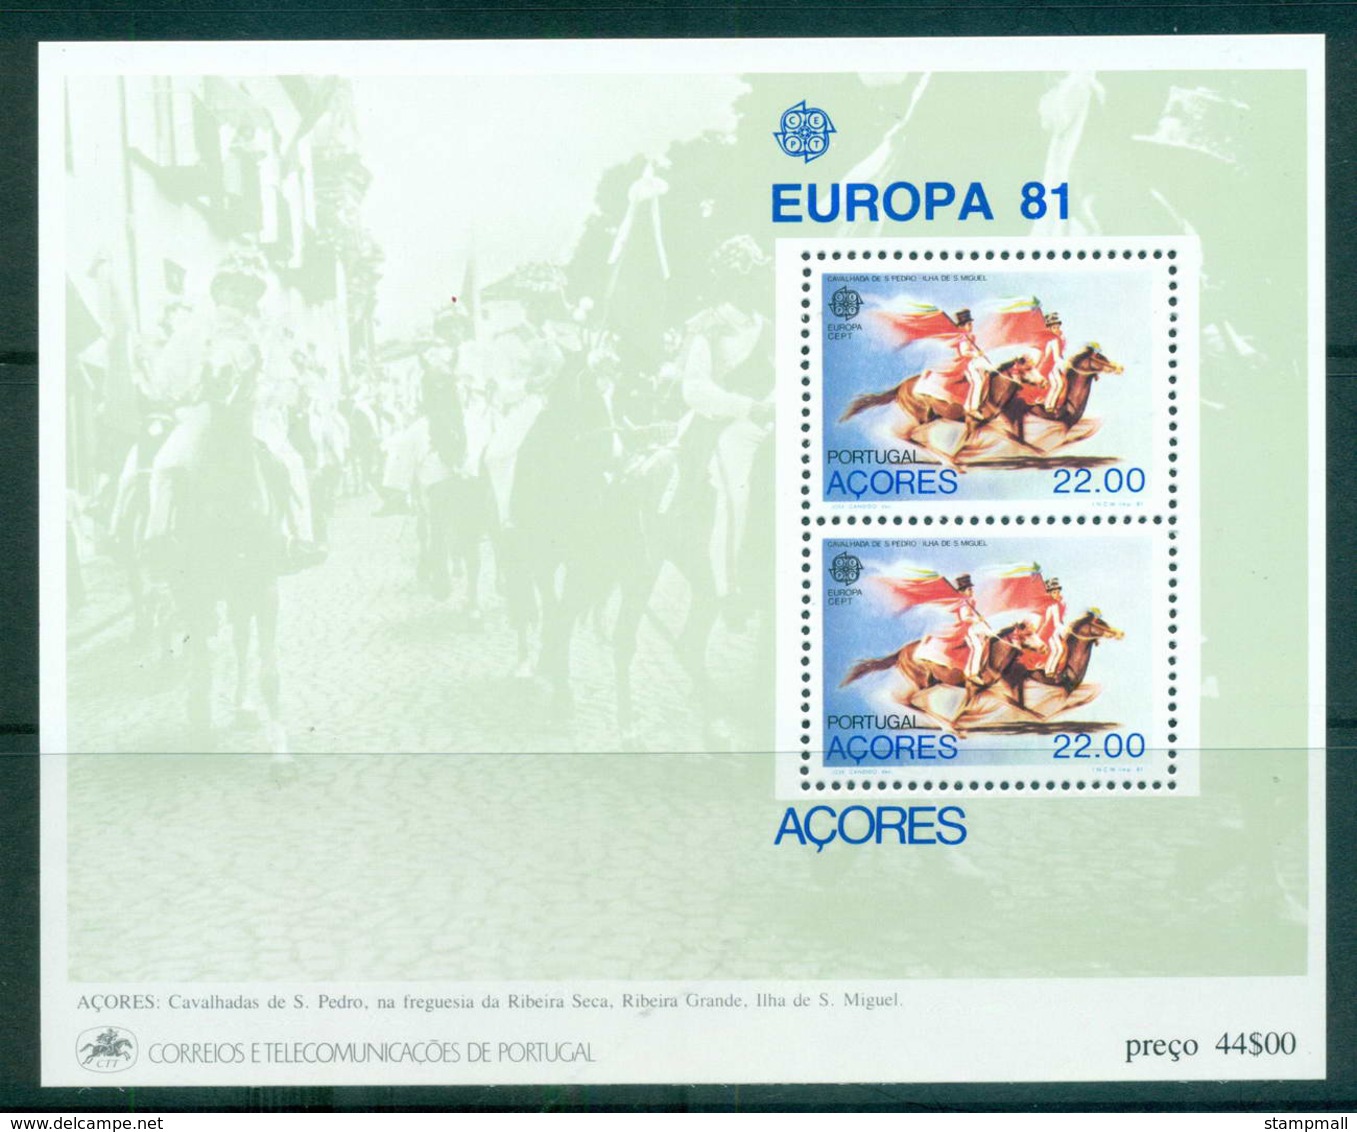 Azores 1981 Europa, Folklore MS MUH Lot65813 - Azores